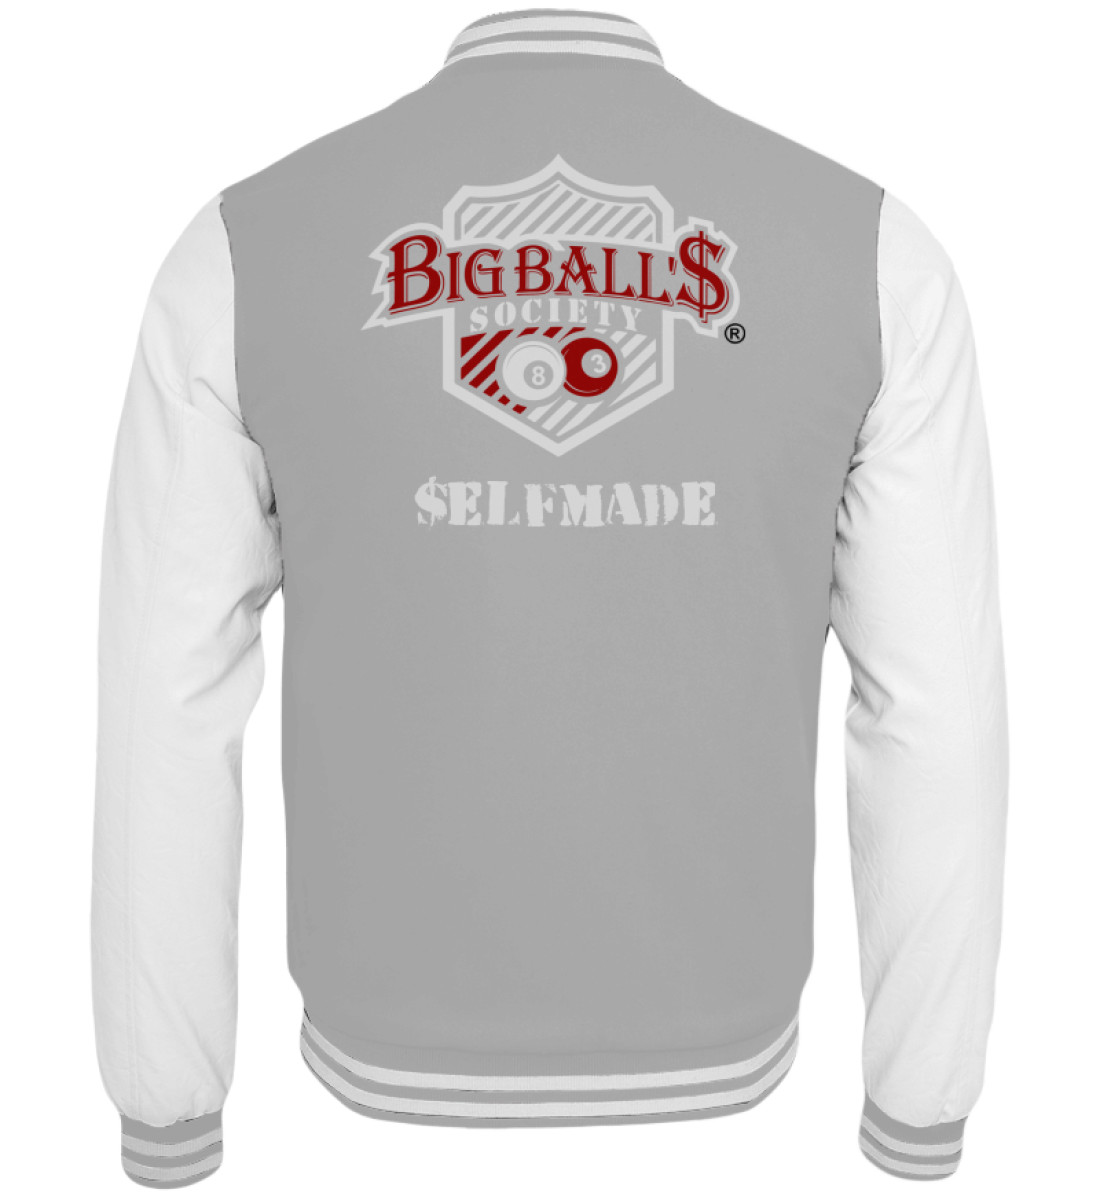 $elfmade White/ Red by Big Ball'$ Society  - College Sweatjacke